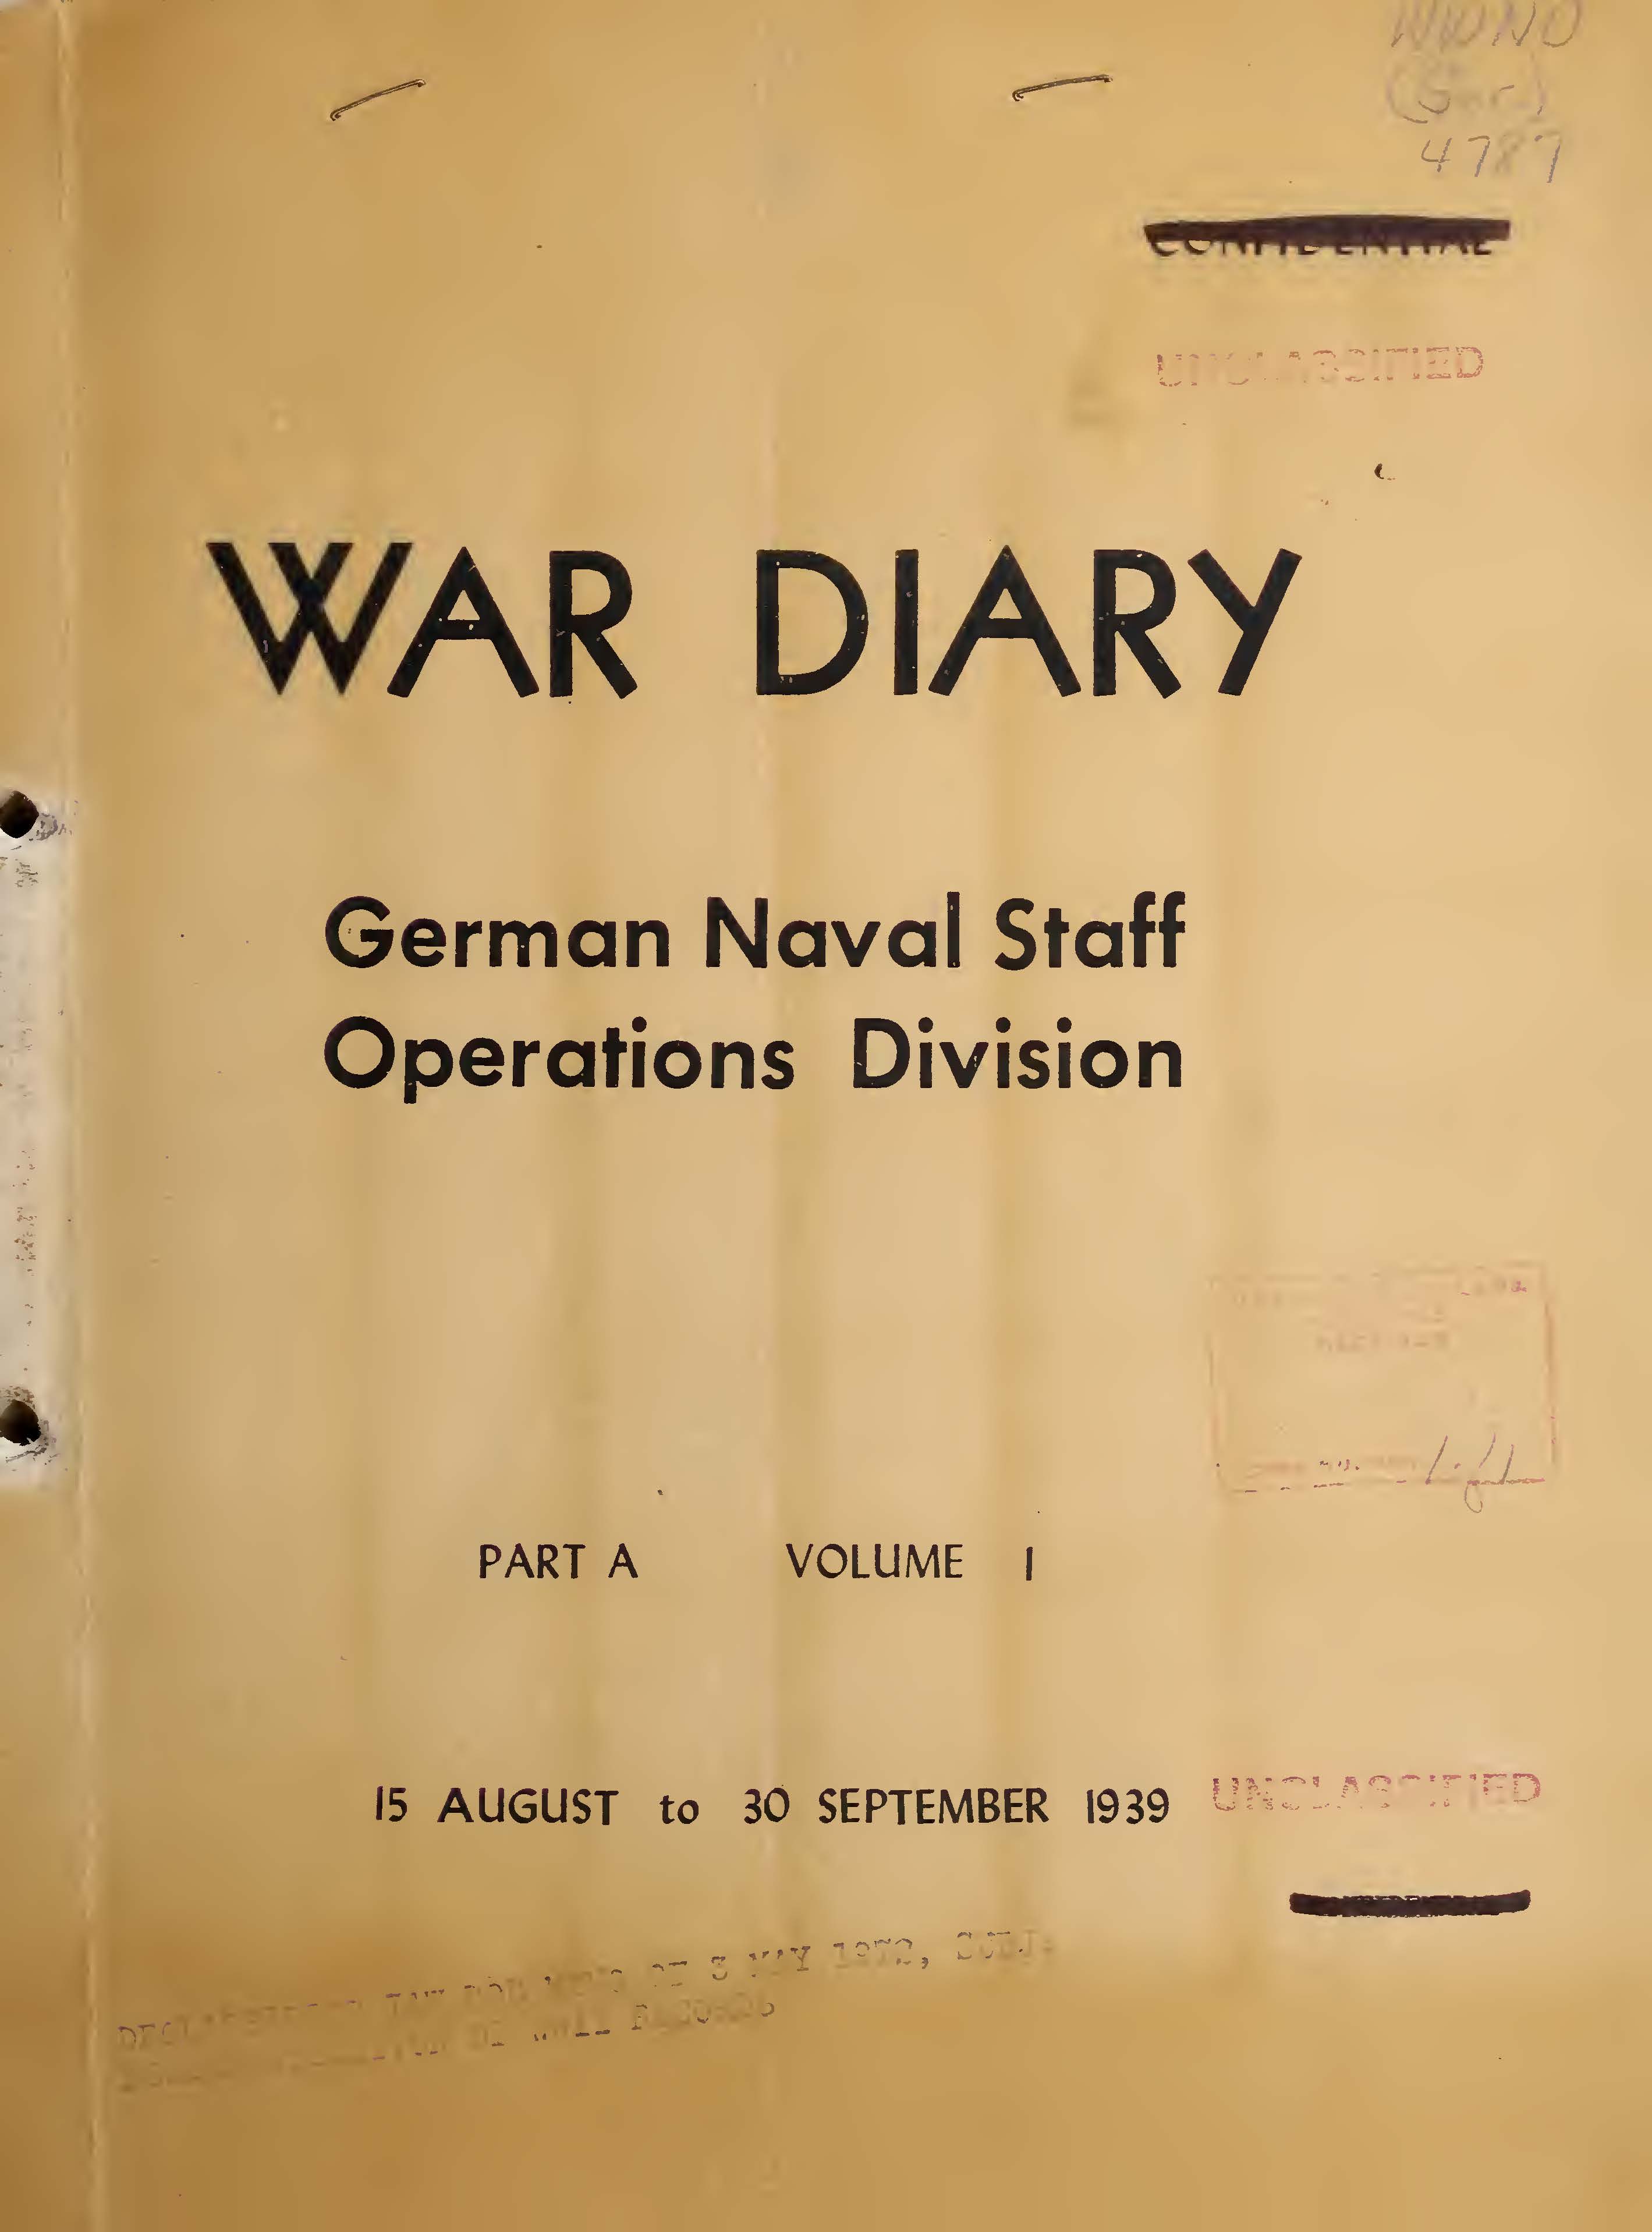 War Diary of German Naval Staff (Operations Division) Part A, Volume 1, 15 August to 30 September 1939